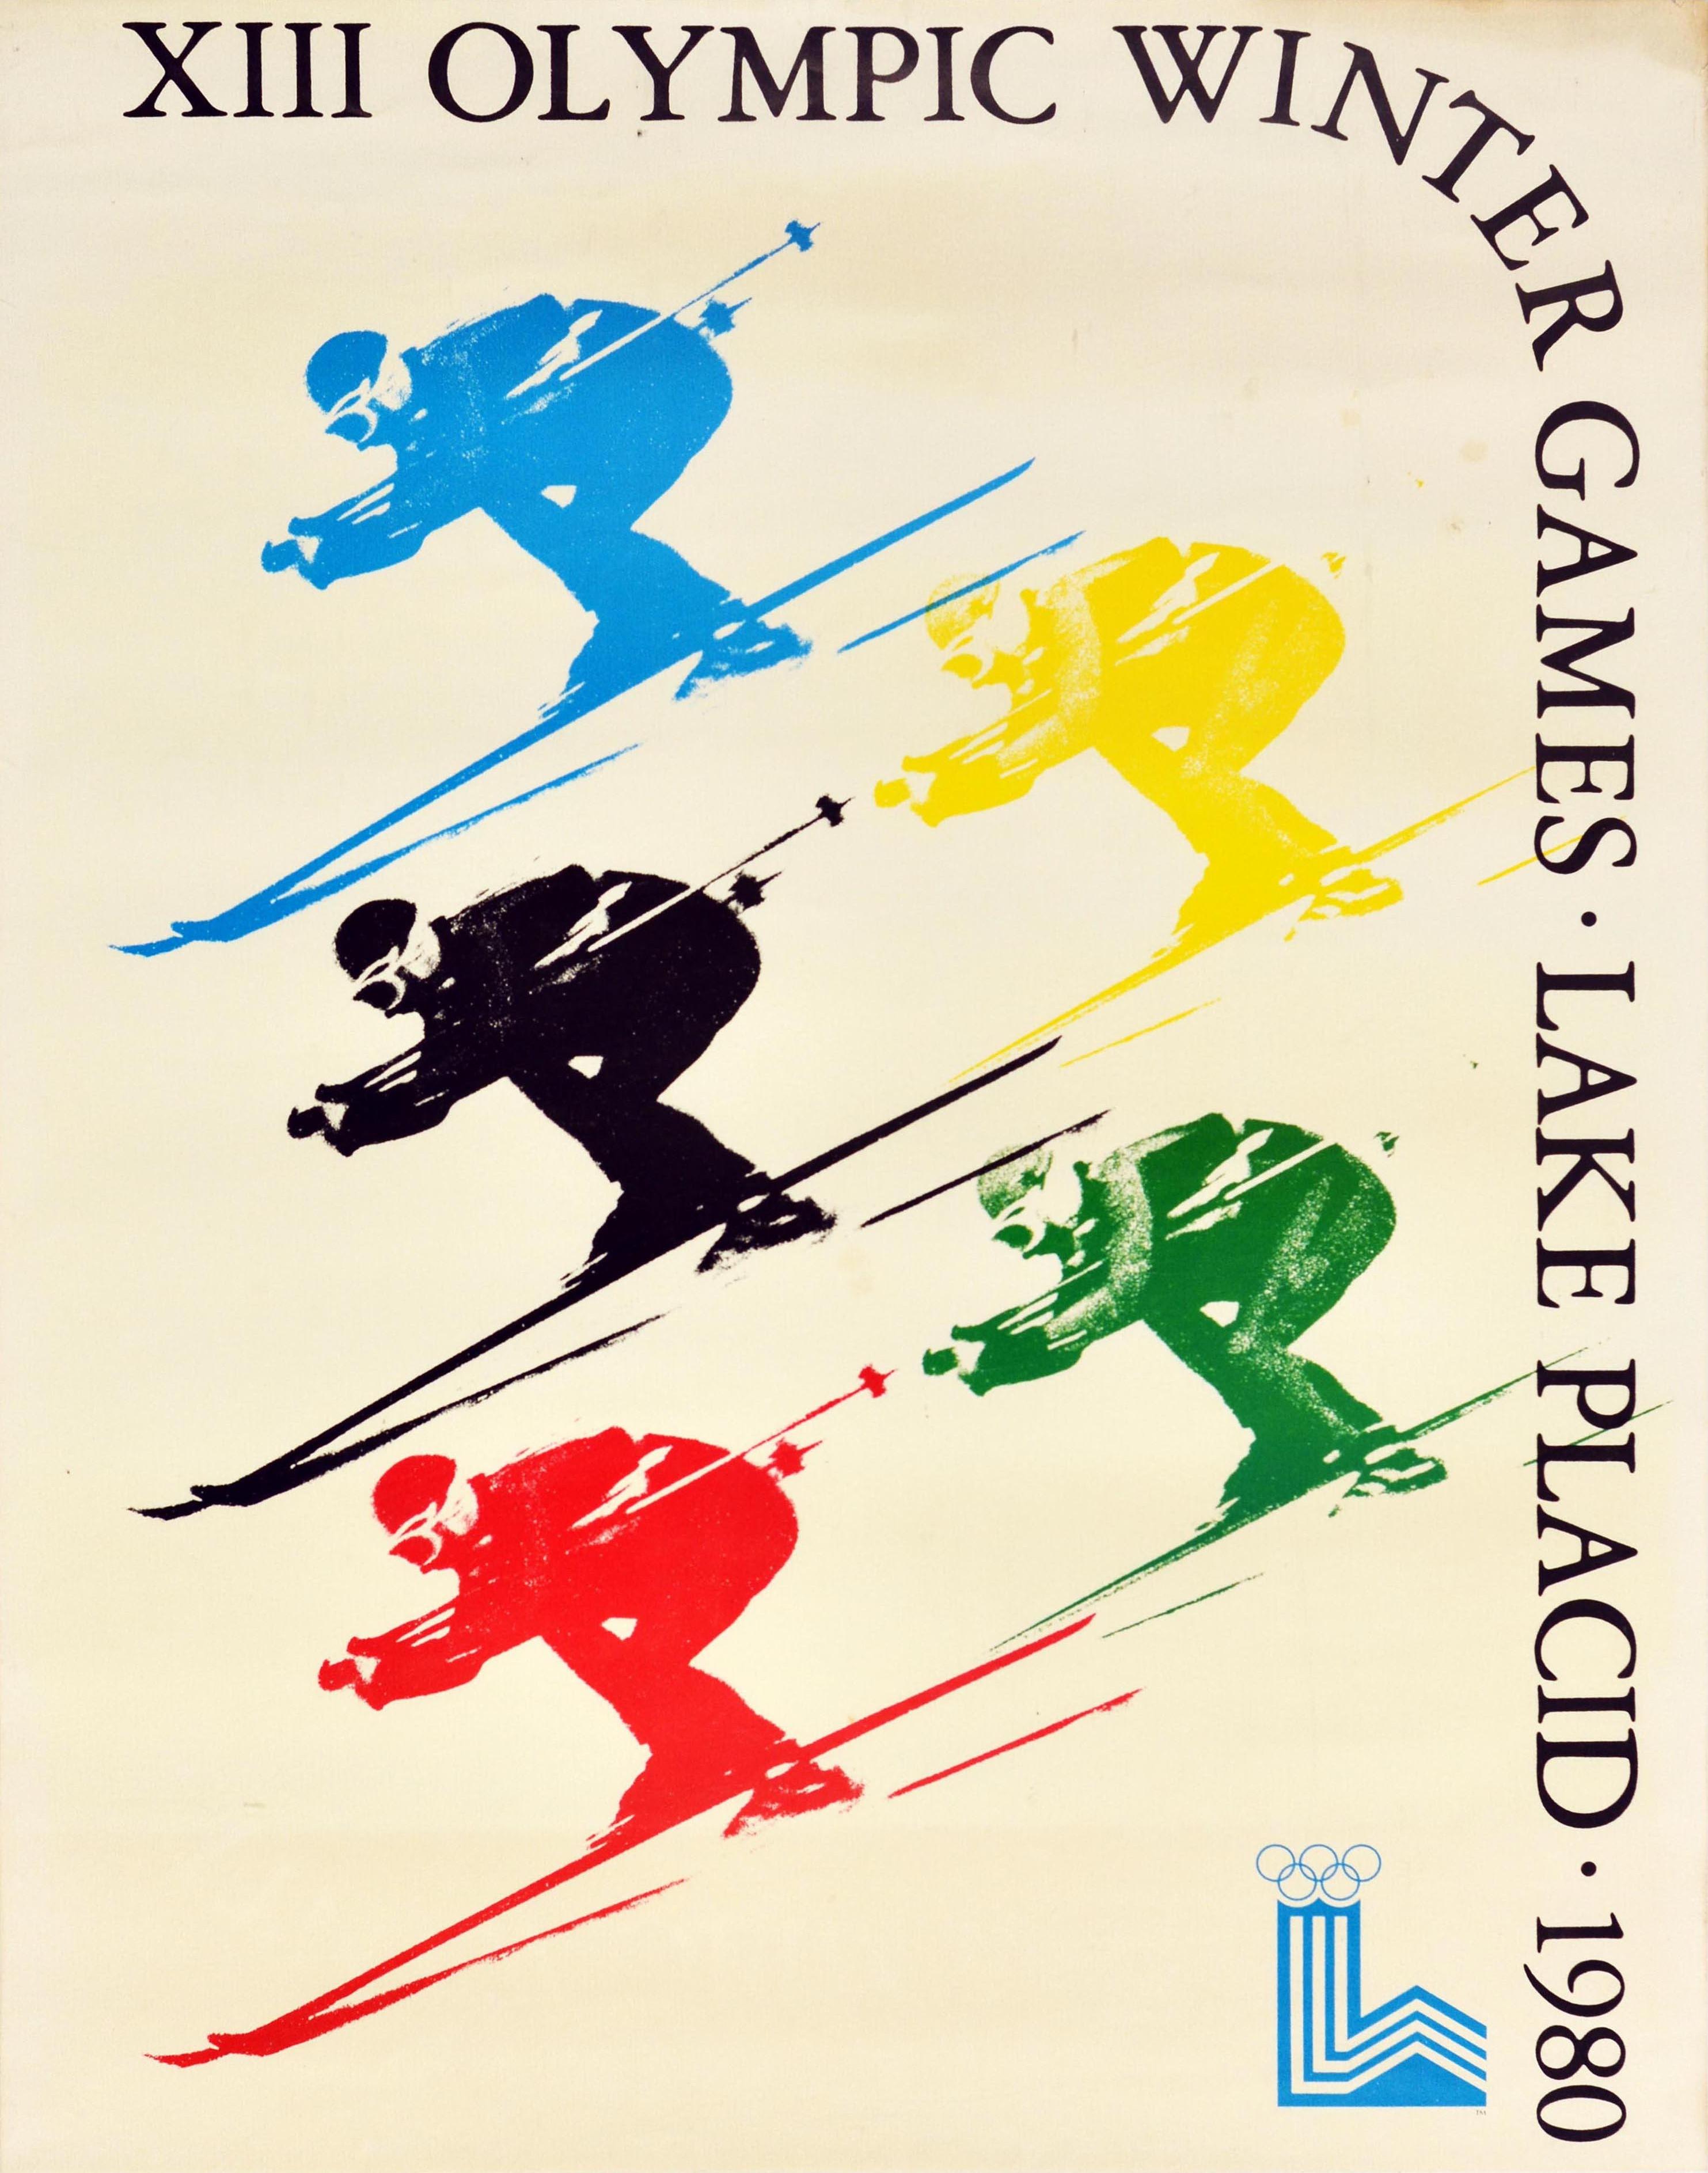 Unknown Print - Original Vintage Sport Poster Lake Placid 1980 Winter Olympic Games Skiing USA